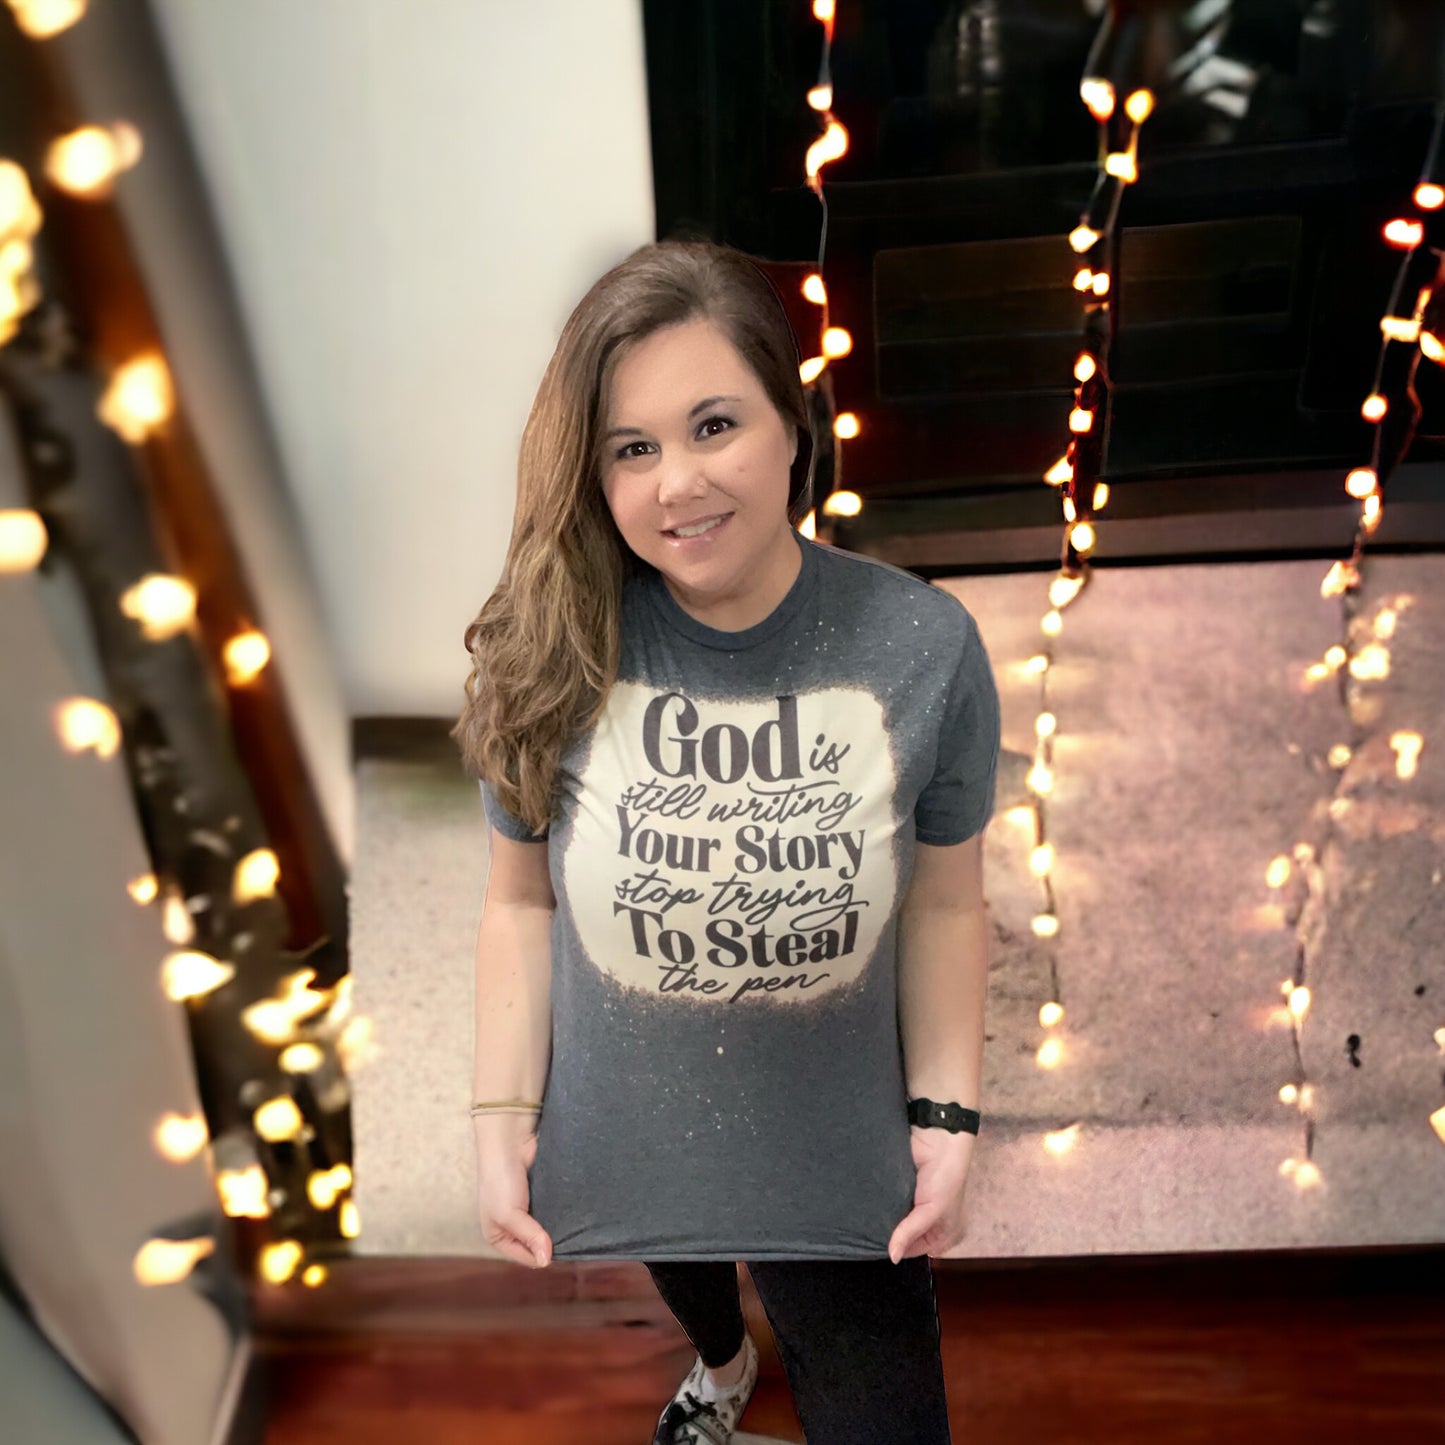 Don’t Steal the Pen  Bleached Handmade Christian Shirt - Heather's Heavenly Boutique